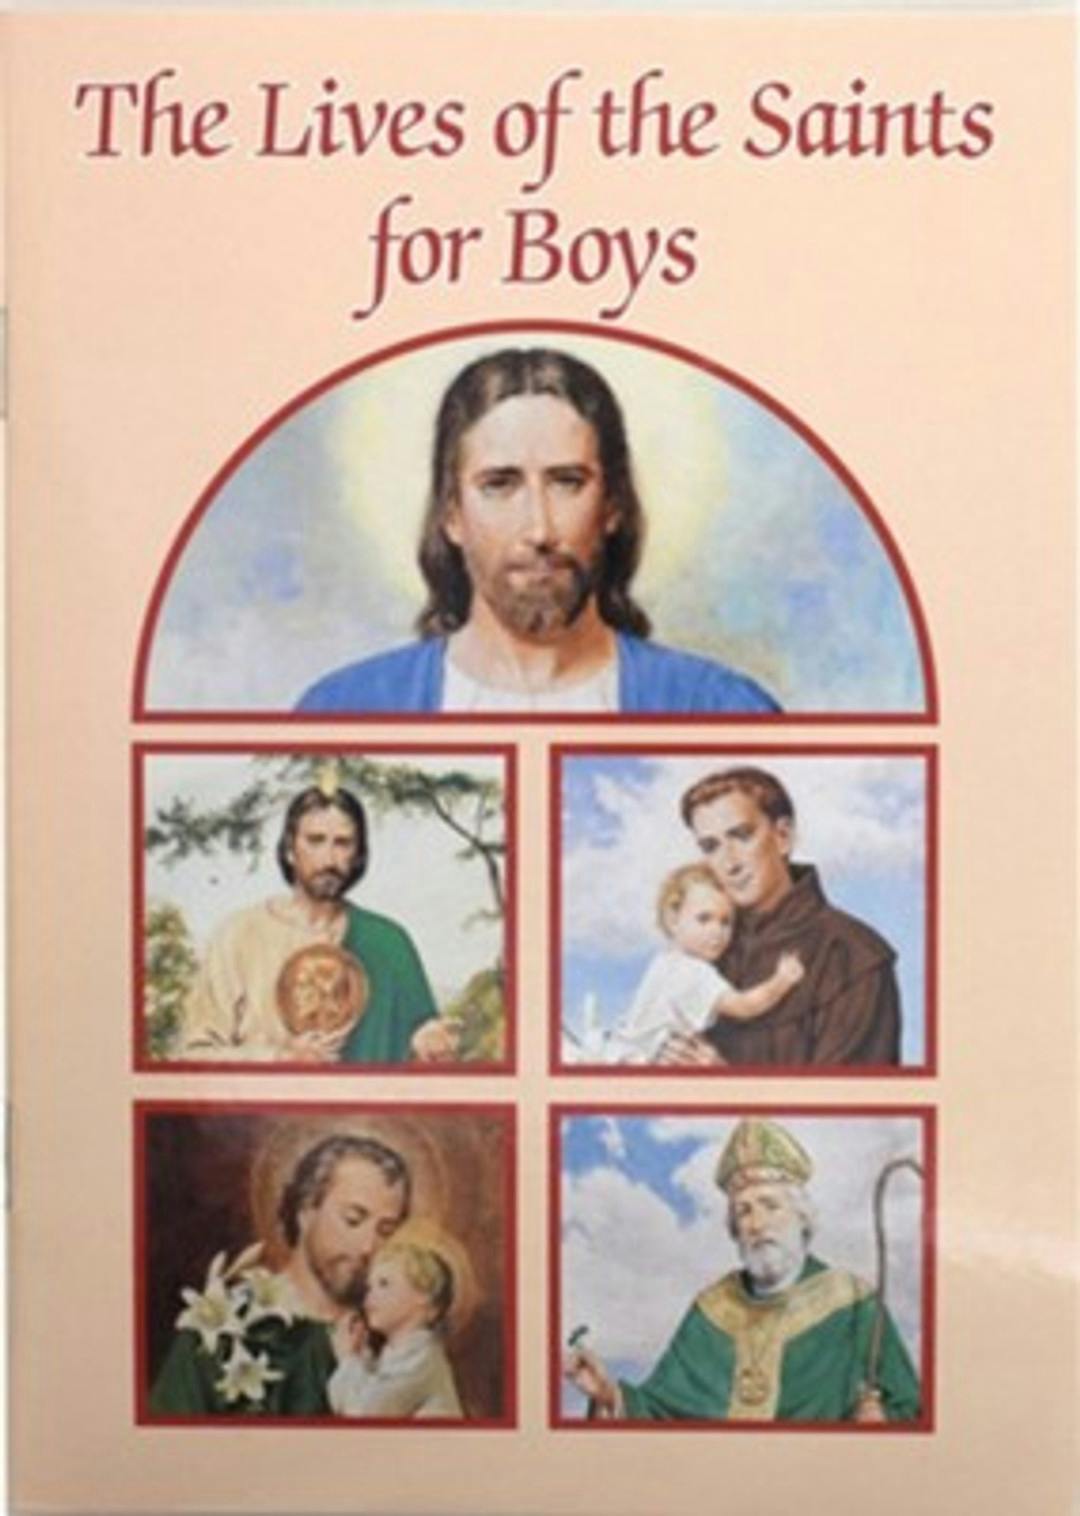 The Lives of the Saints for Boys